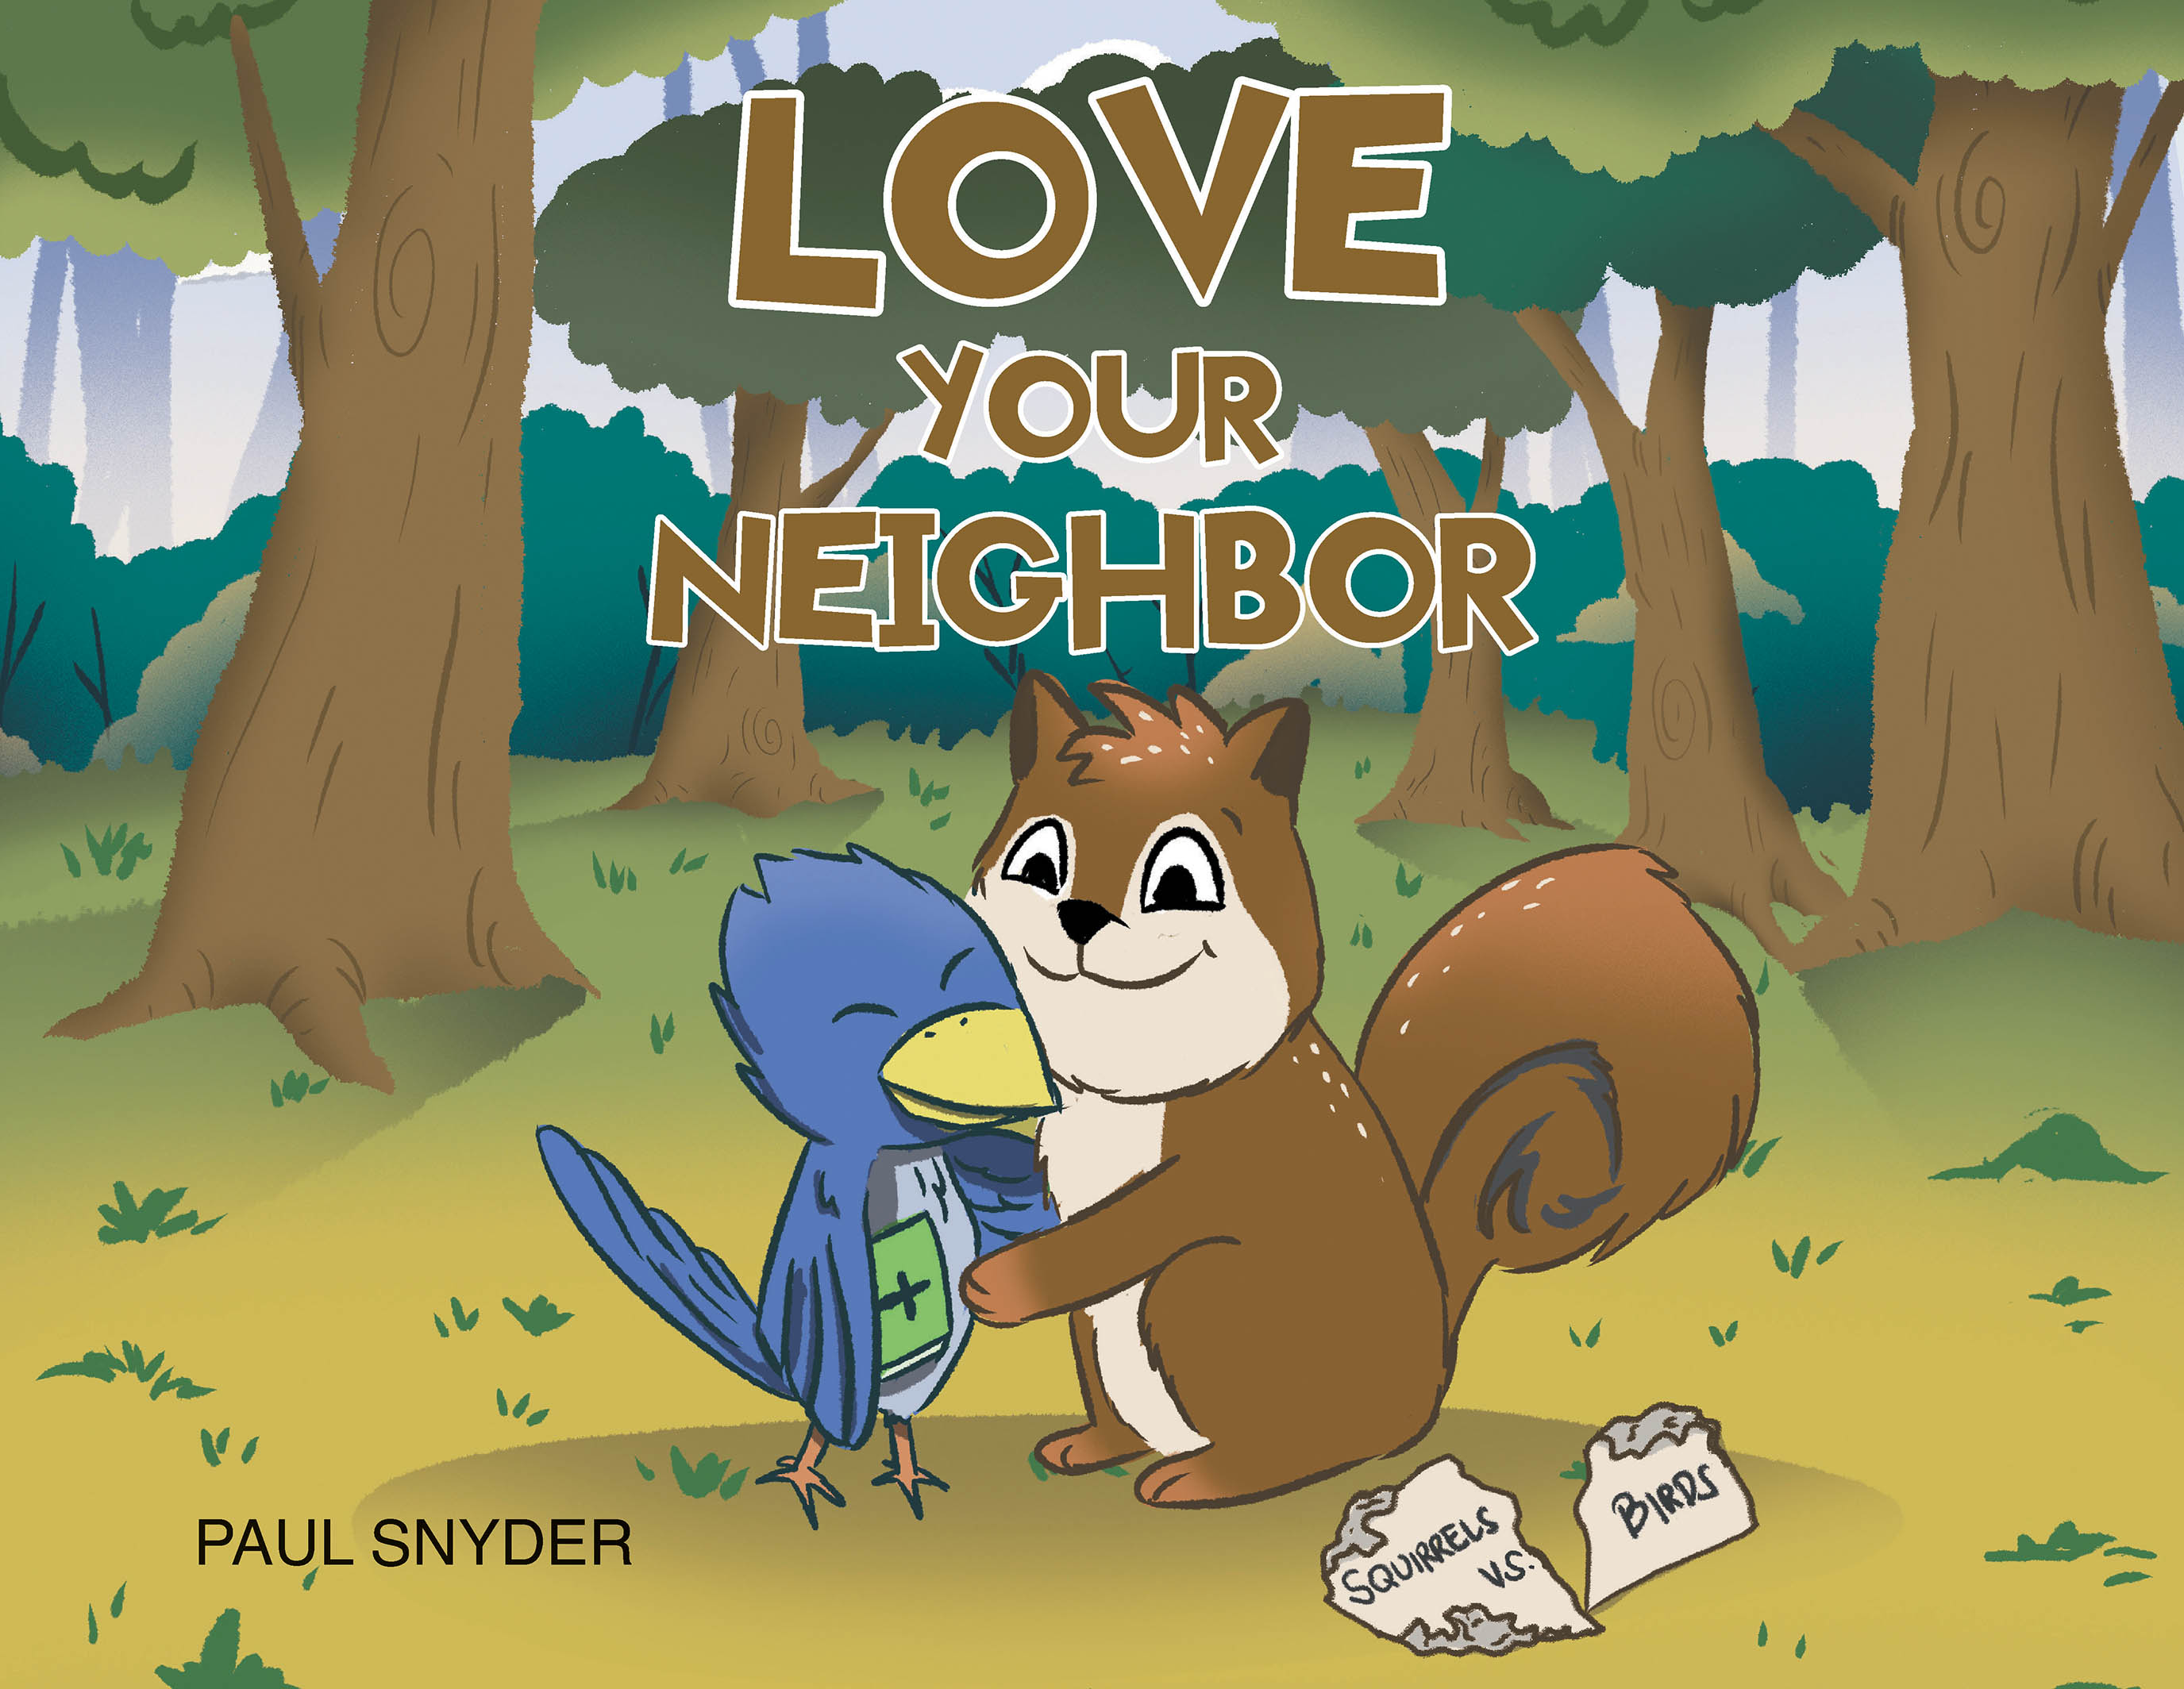 Paul Snyder’s Newly Released "Love Your Neighbor" is a Heartwarming Message of Compassion and Kindness